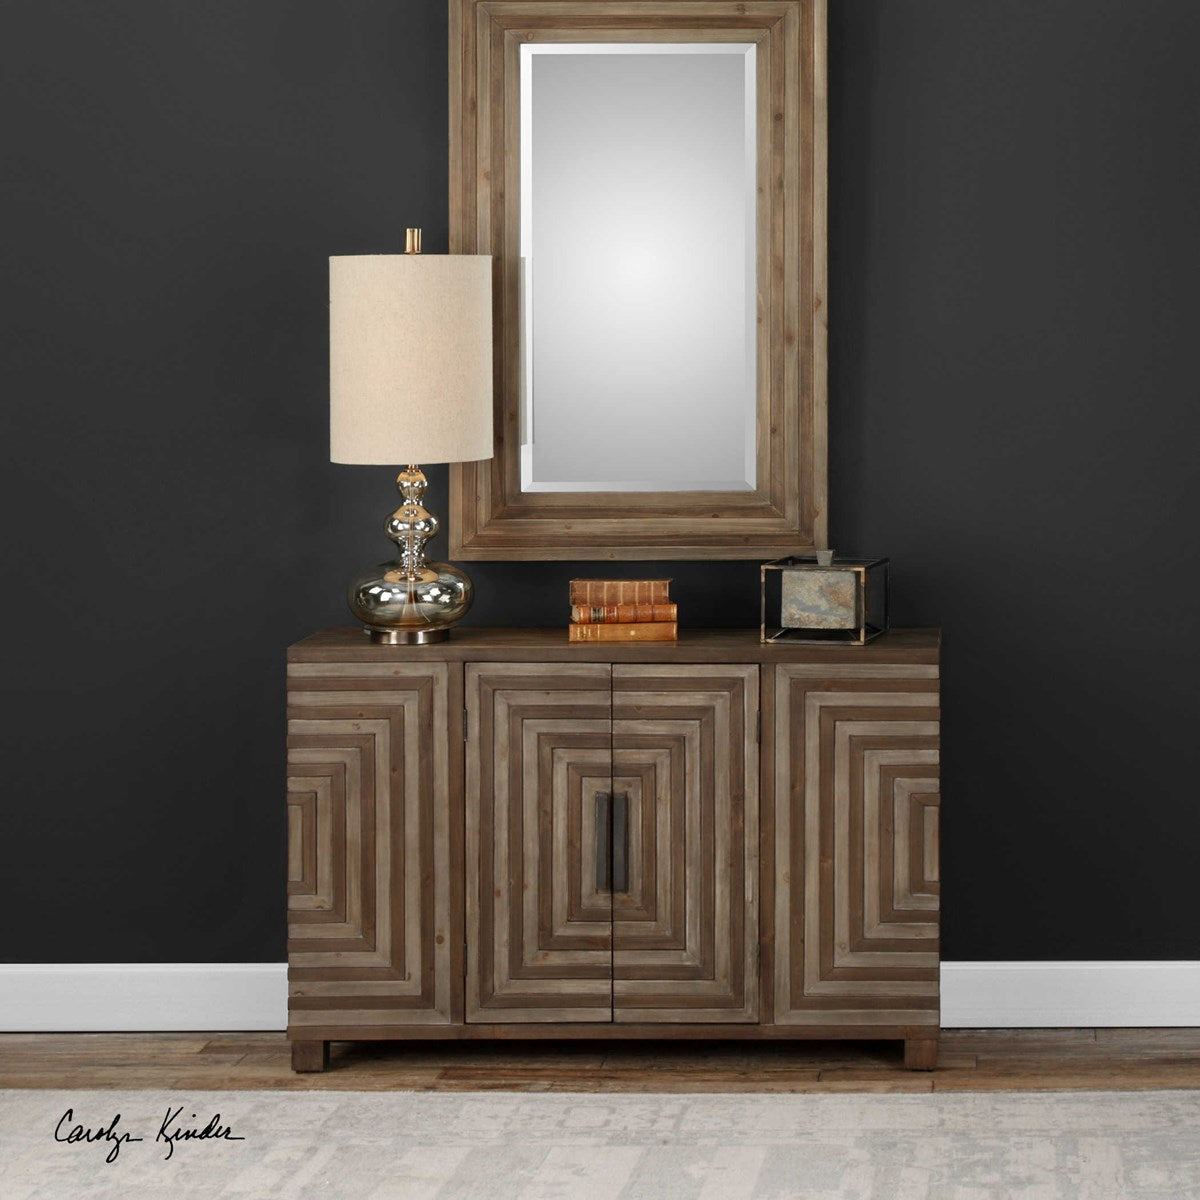 Layton Console Cabinet - RSVP Style